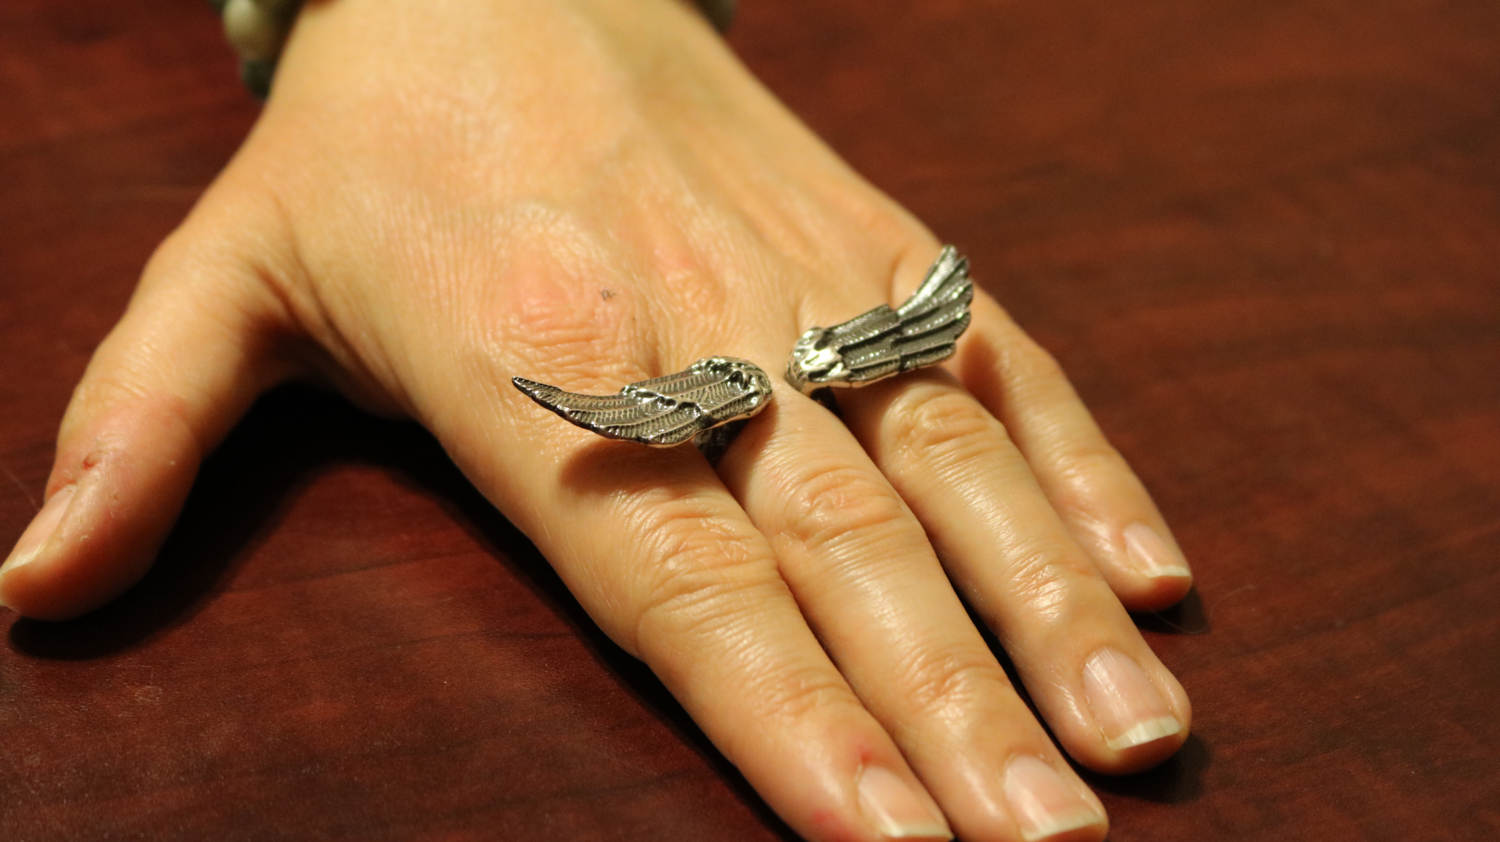 Angel Wings Ring in Sterling Silver or Antique Bronze, Silver Wings Ring, Bronze Wings Ring, Silver Angel Wings Ring, Bronze Angel Wings Ring, Angel Wings Ring, Silver Aviation Ring, Bronze Aviation Ring, Double Wings Ring, Silver Fantasy Ring, Bronze Fantasy Ring